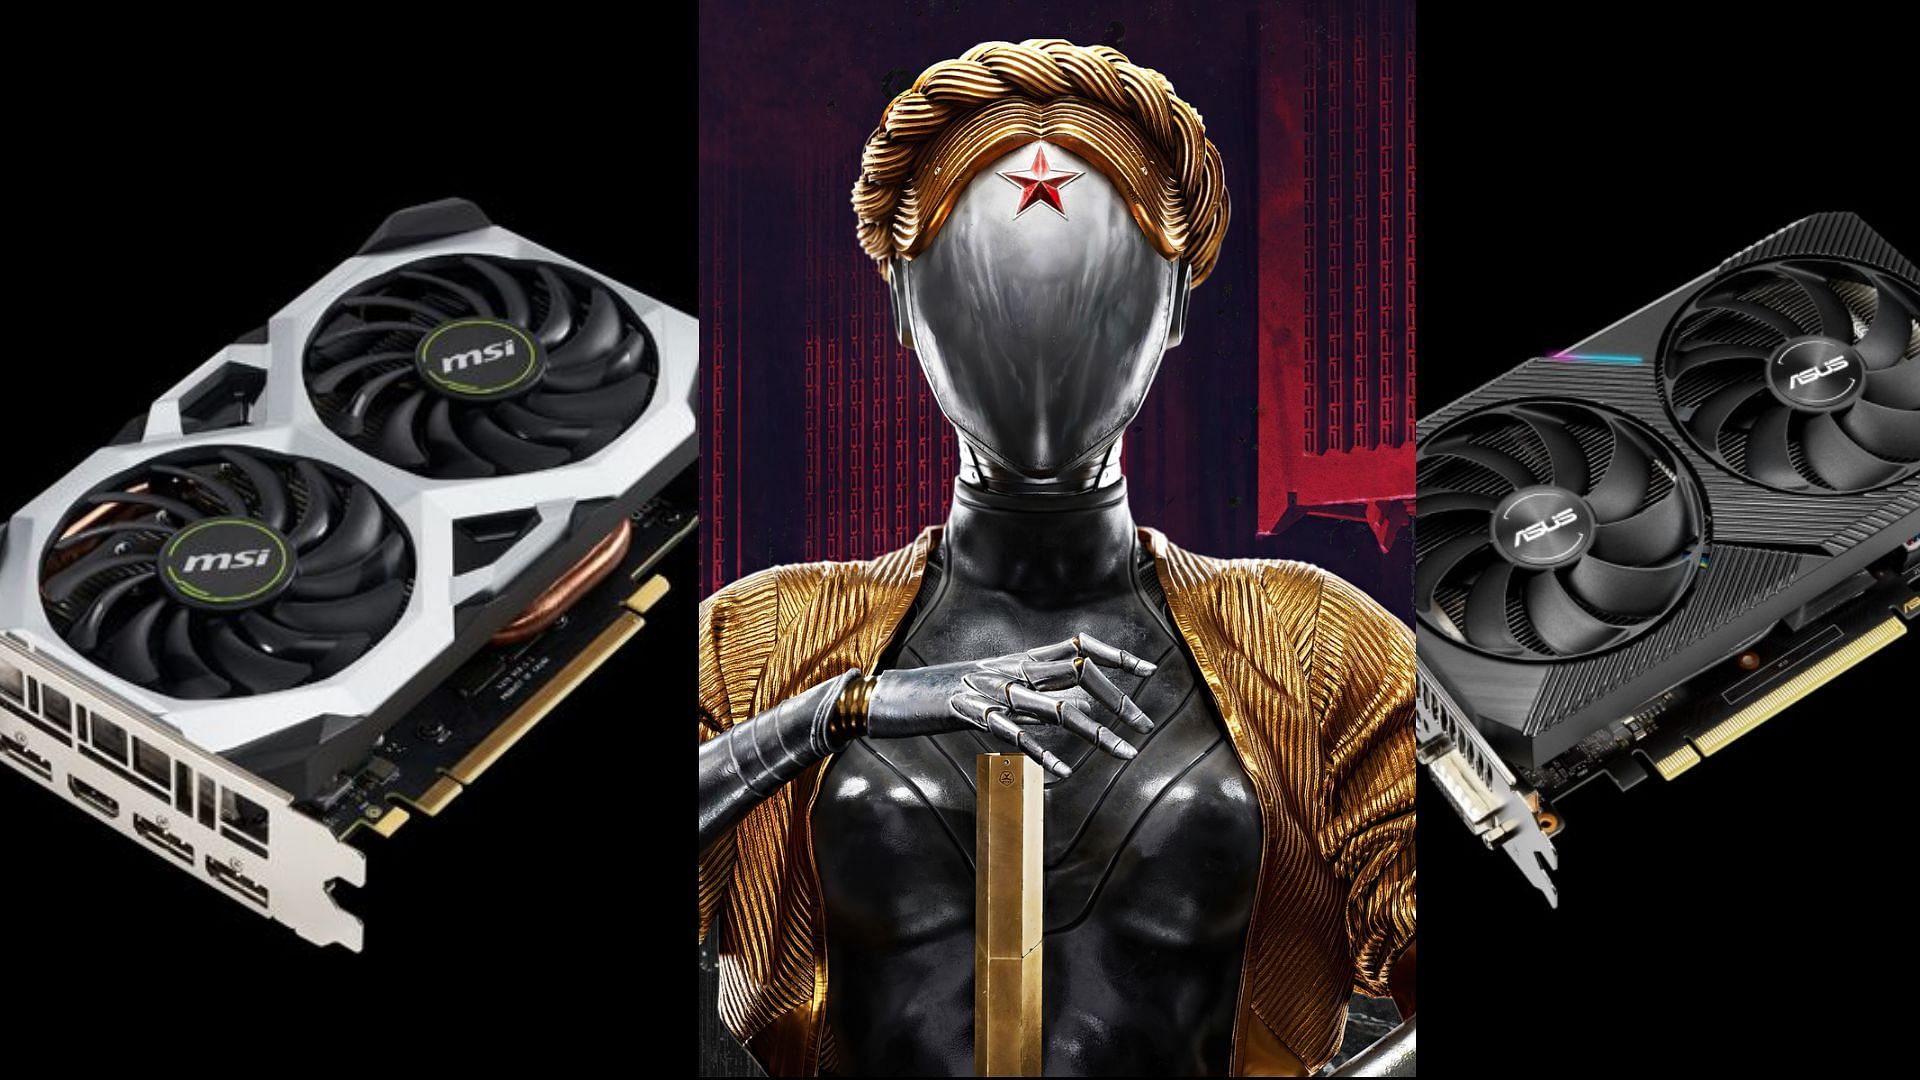 Take Your Gaming to the Next Level with Nvidia GeForce GTX 1660 Super